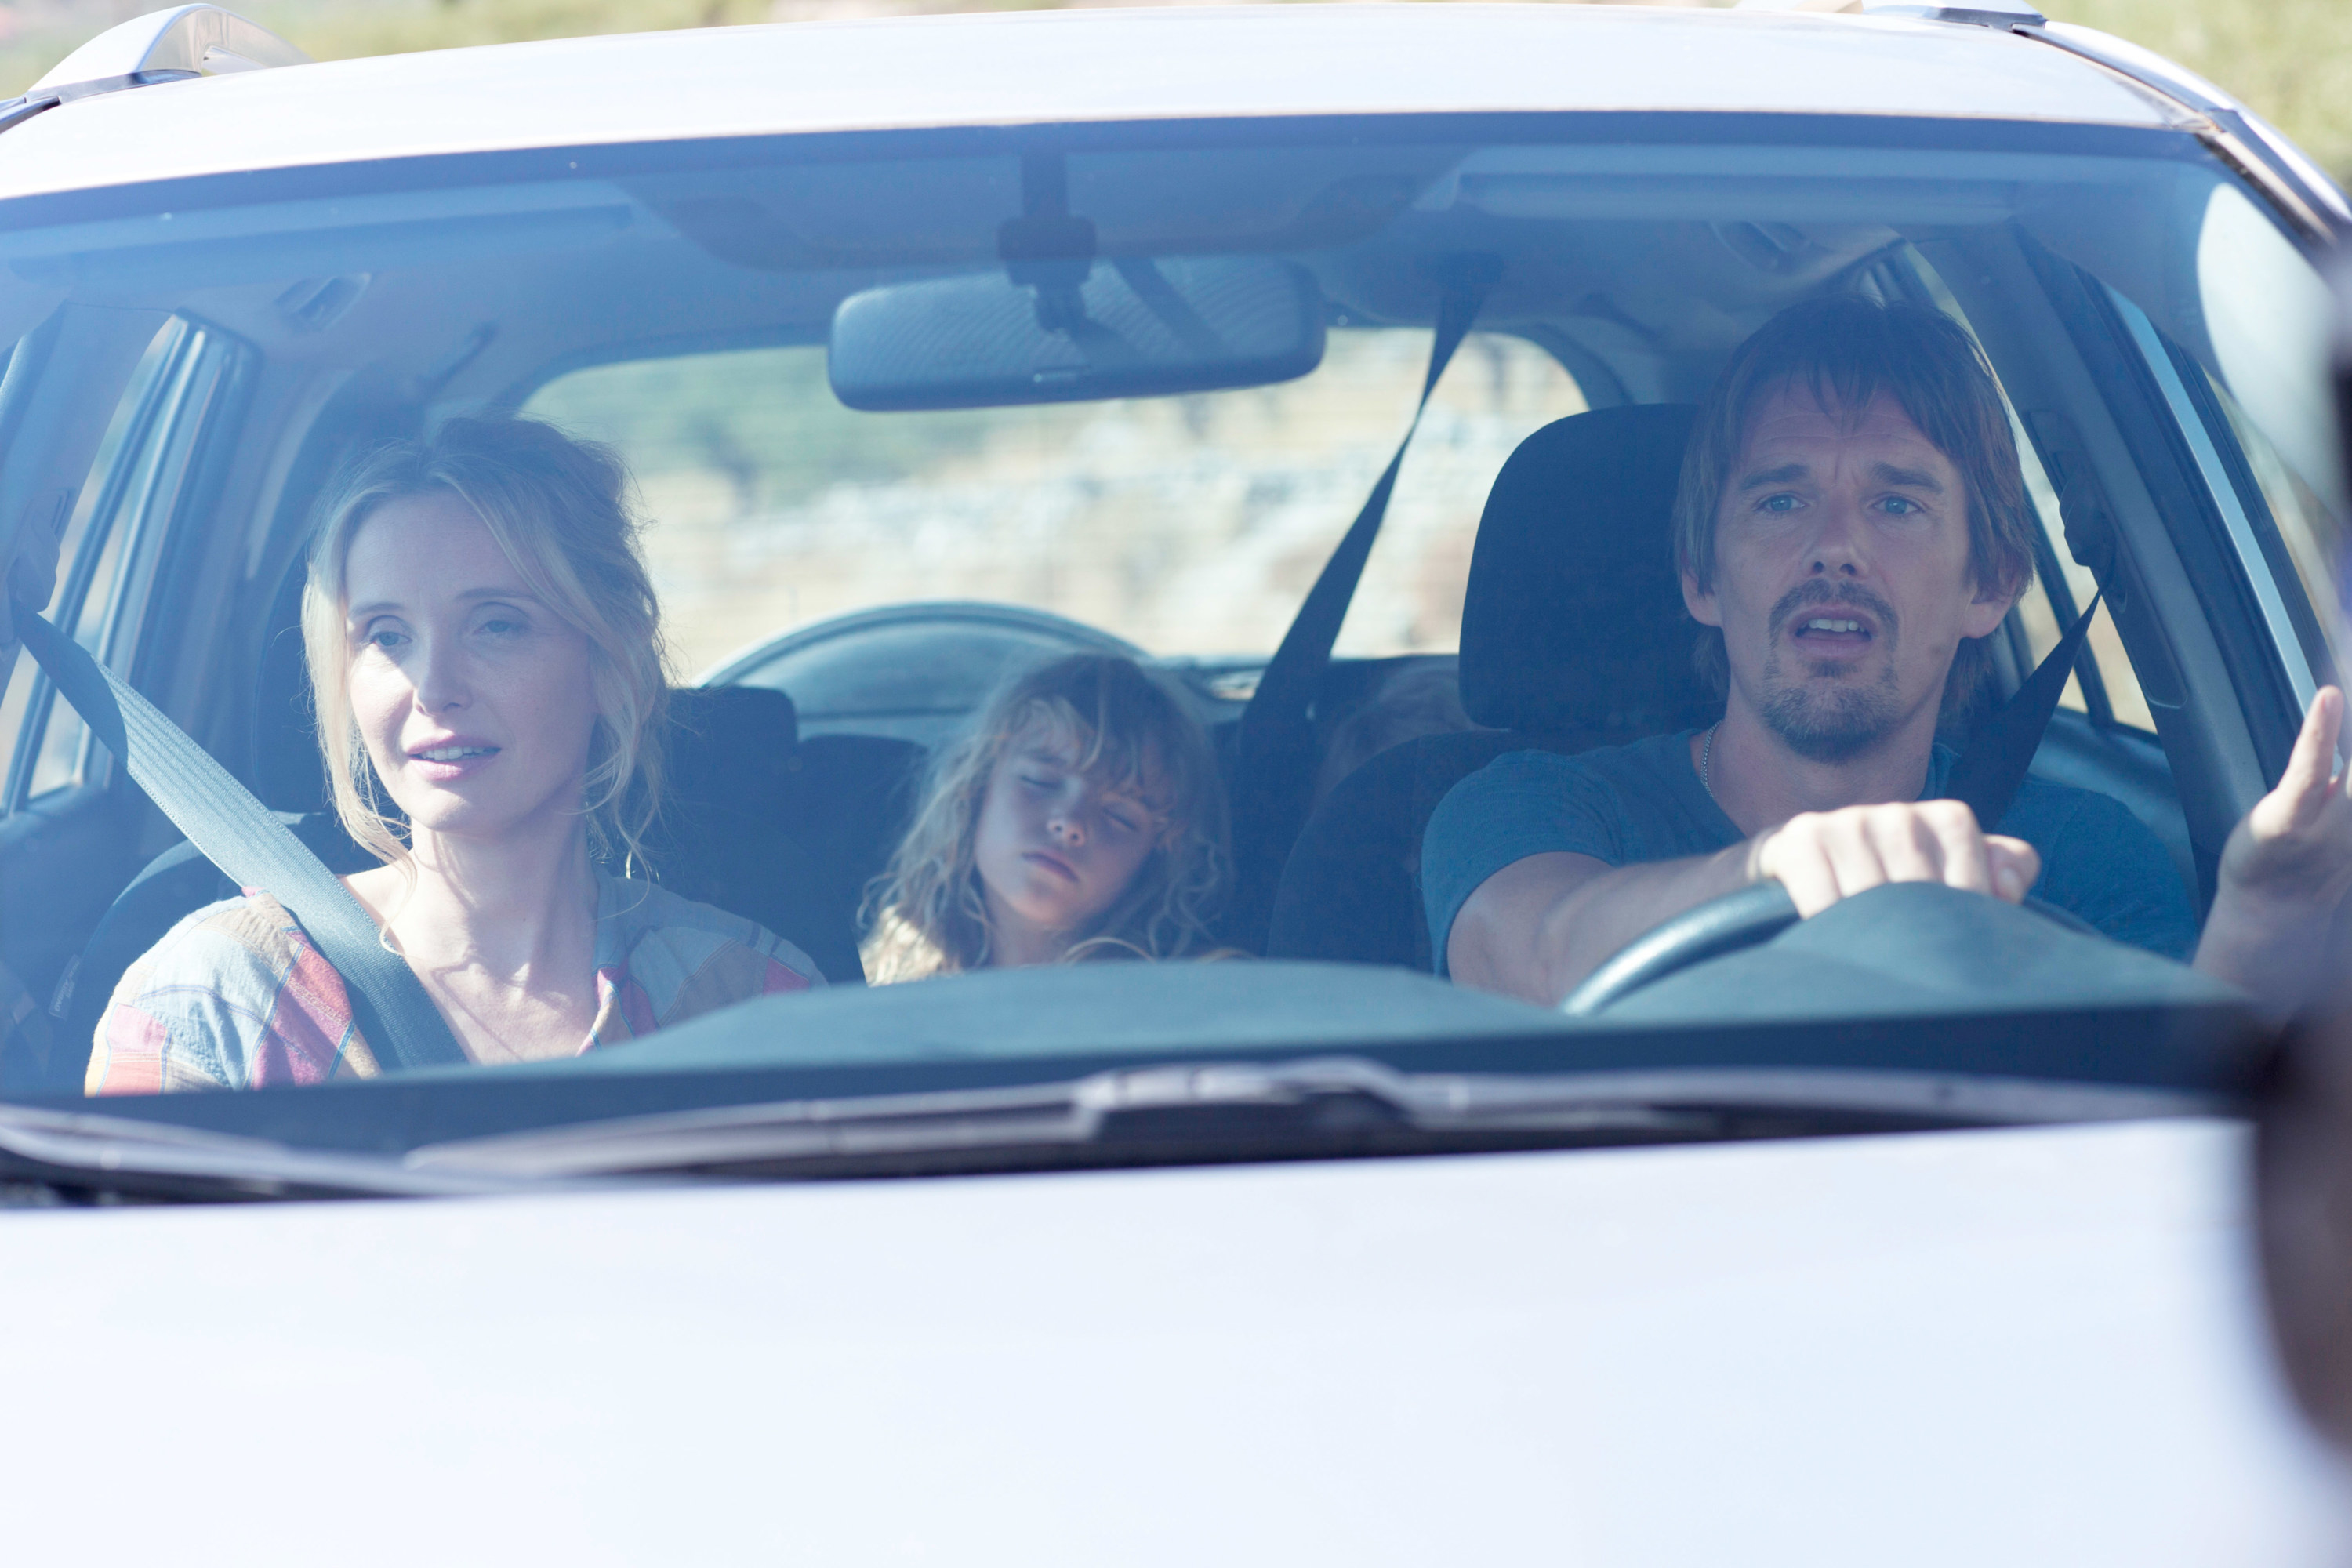 Julie Delpy and Ethan Hawke drive a car